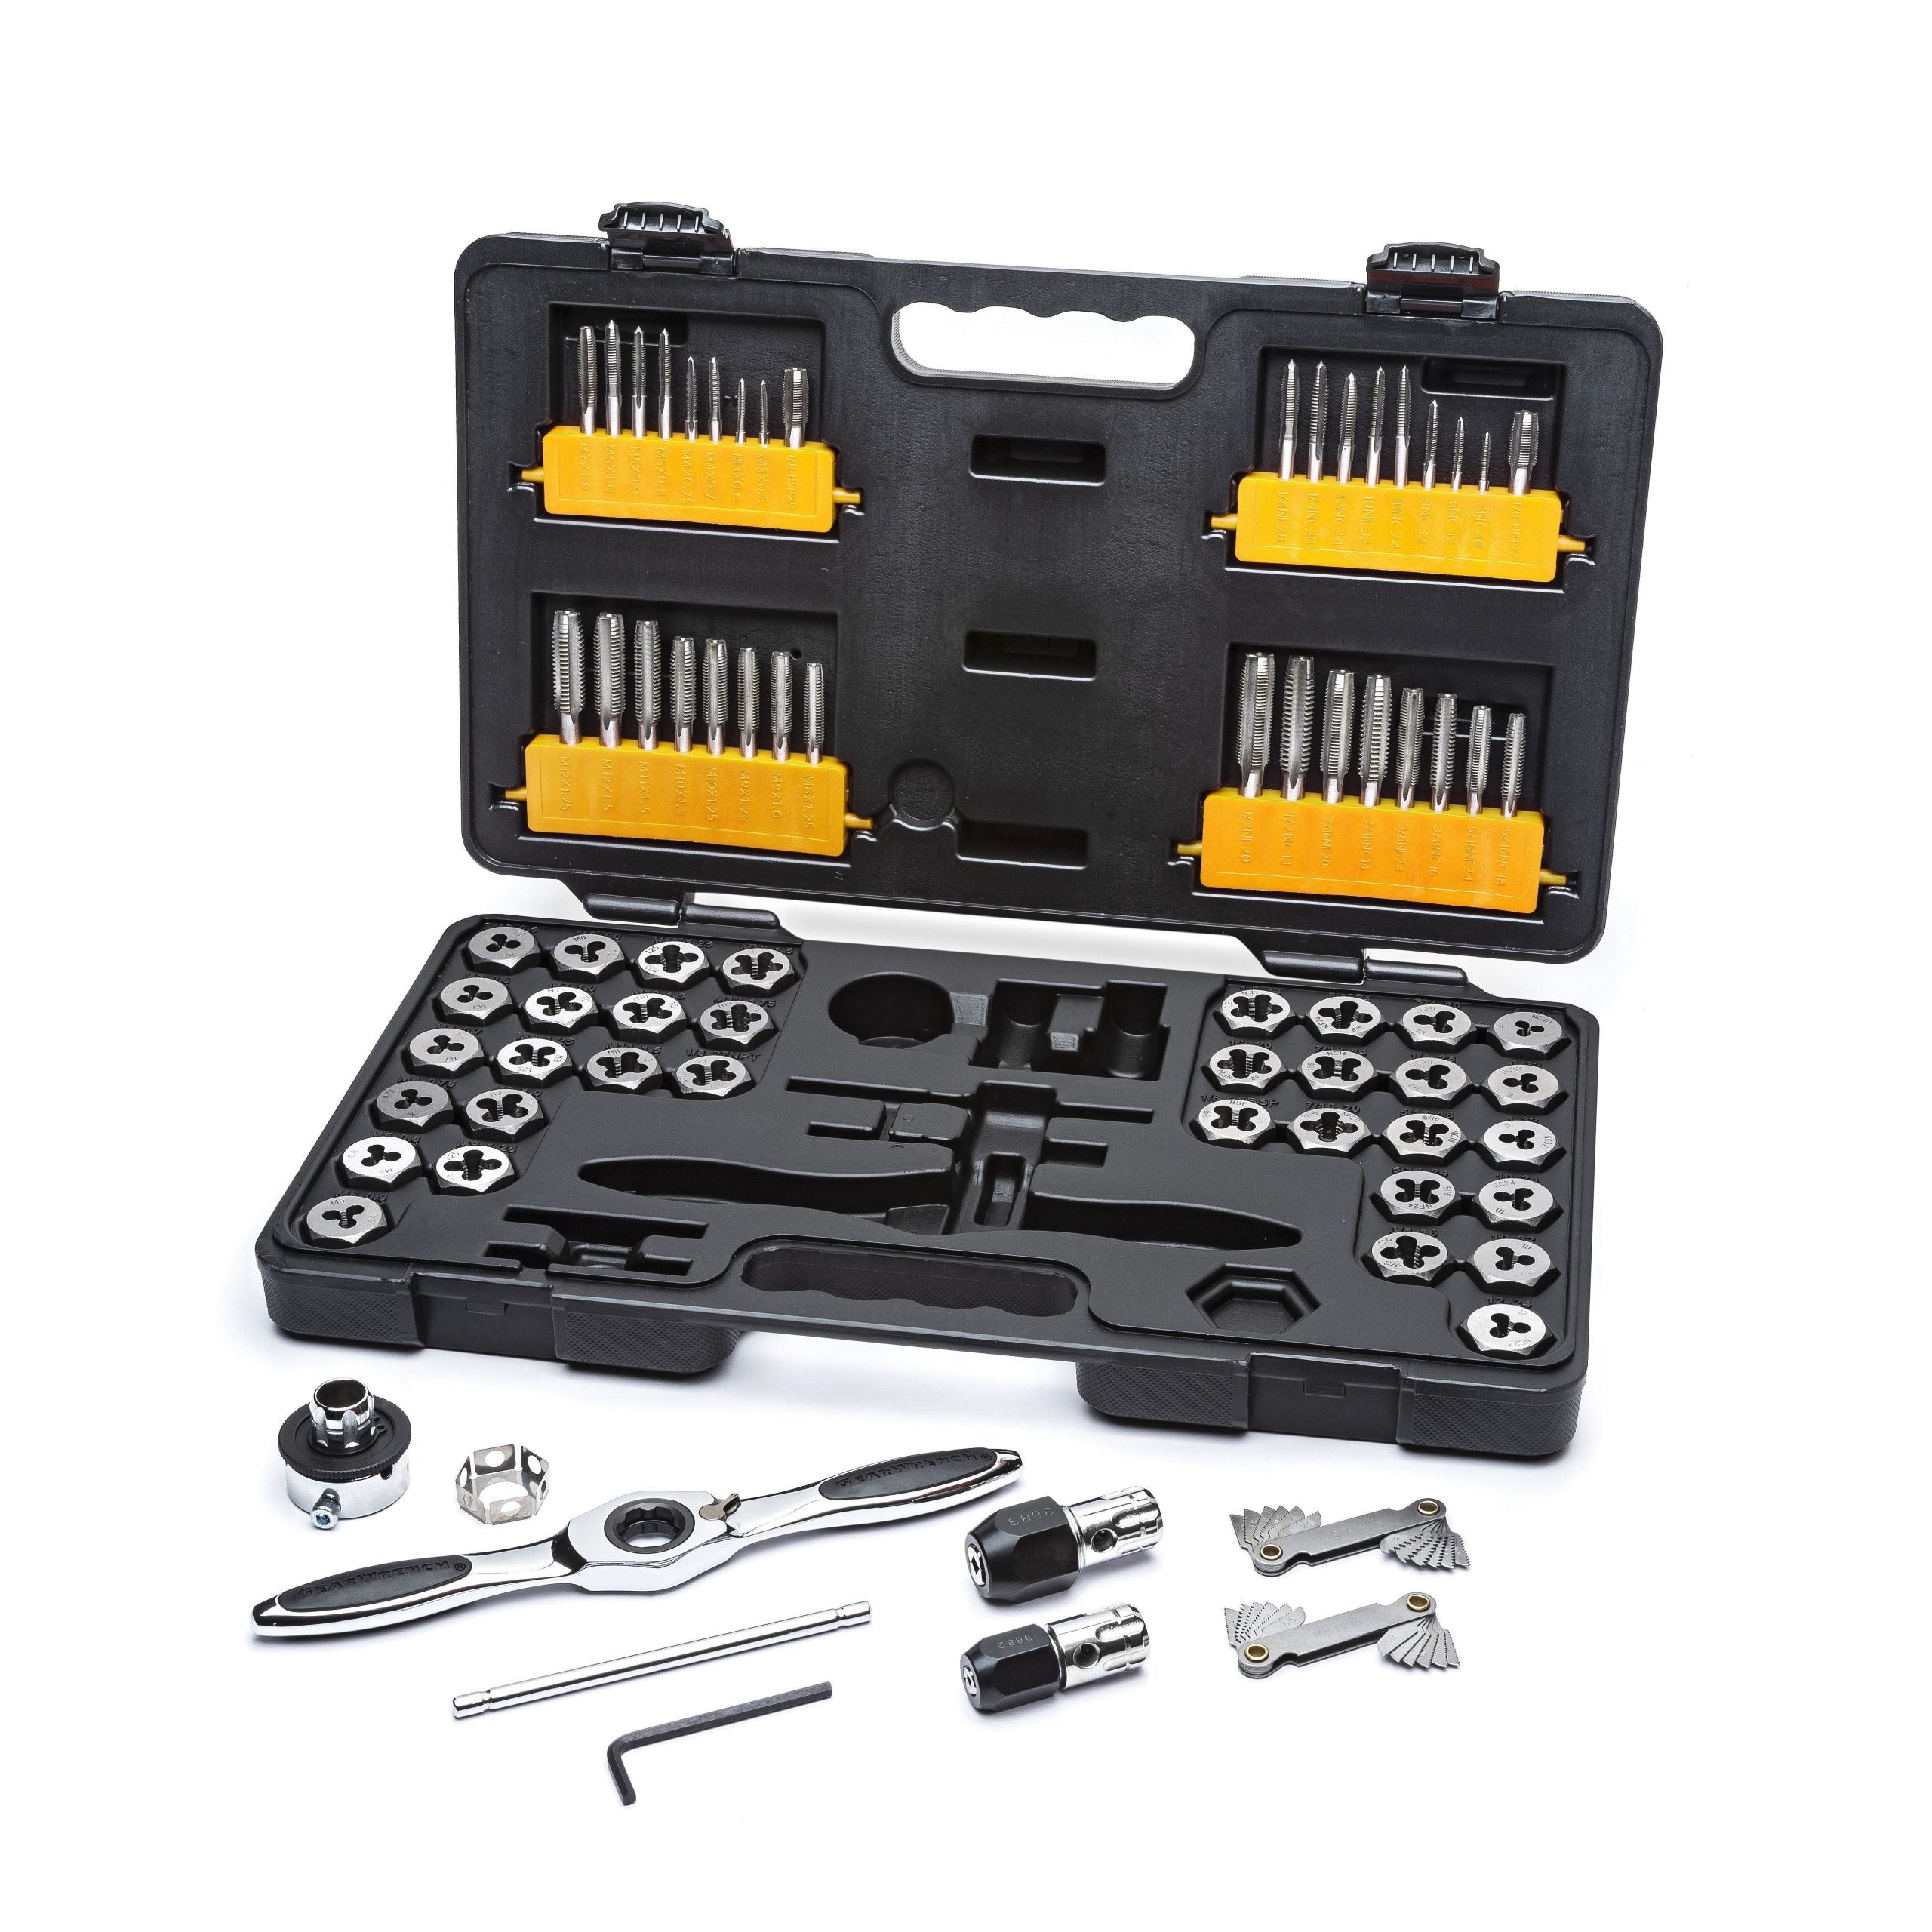 75Pce SAE/Metric Ratcheting Tap and Die Set 3887 by Gearwrench